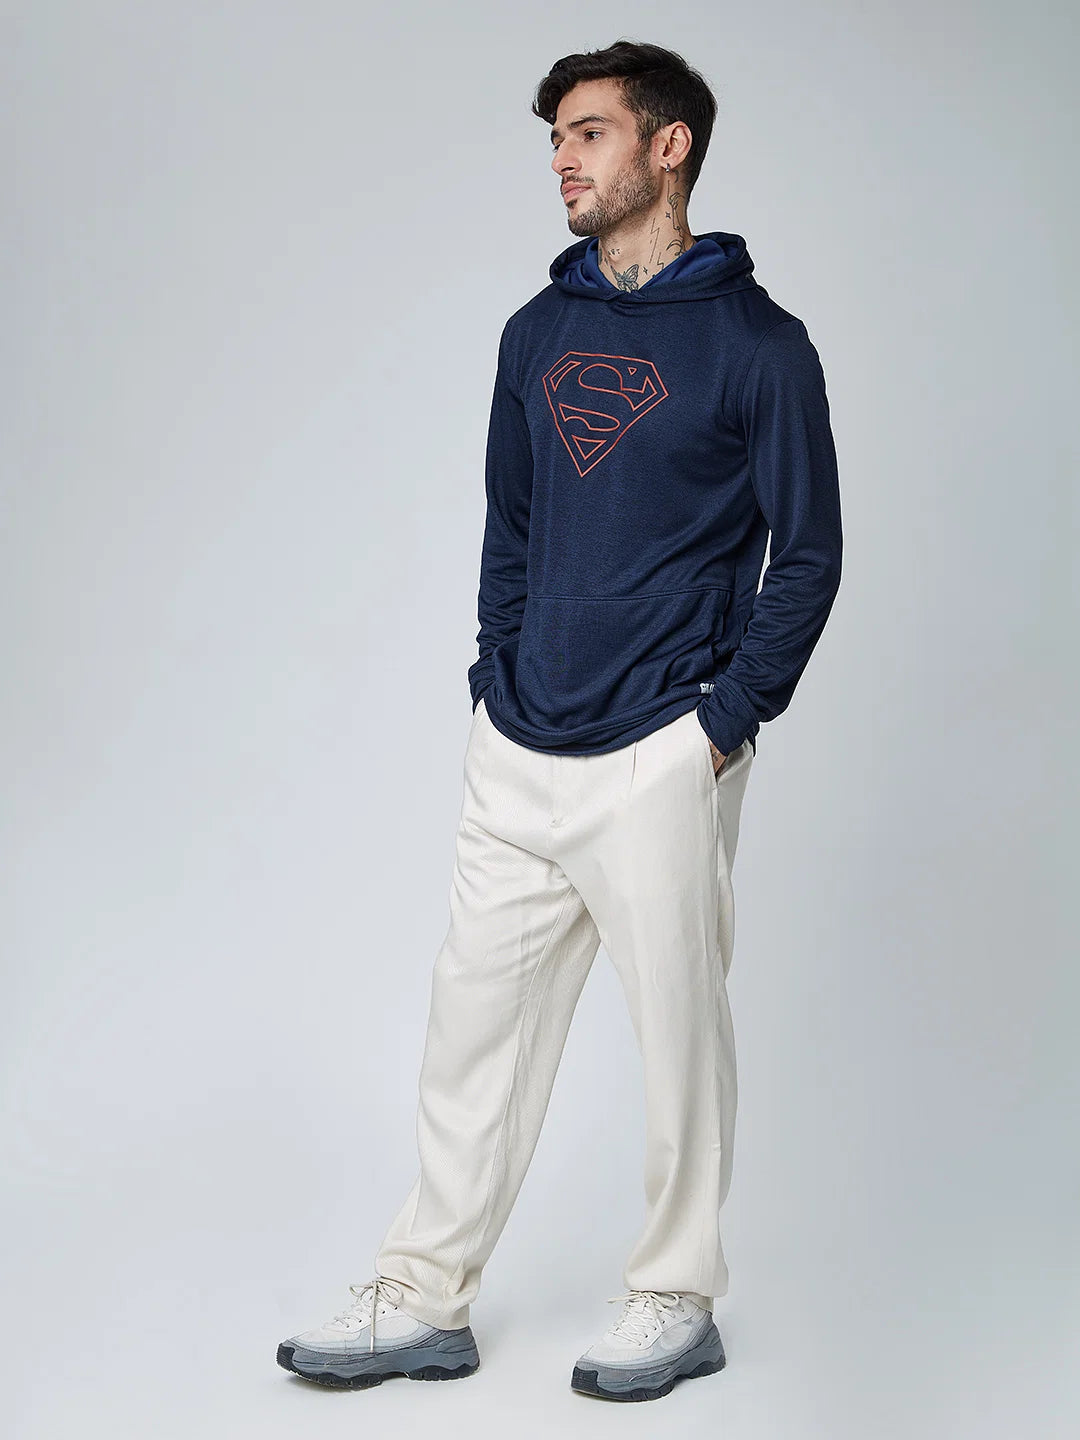 DC Superman All Weather Hoodies (Limited Edition) UK version